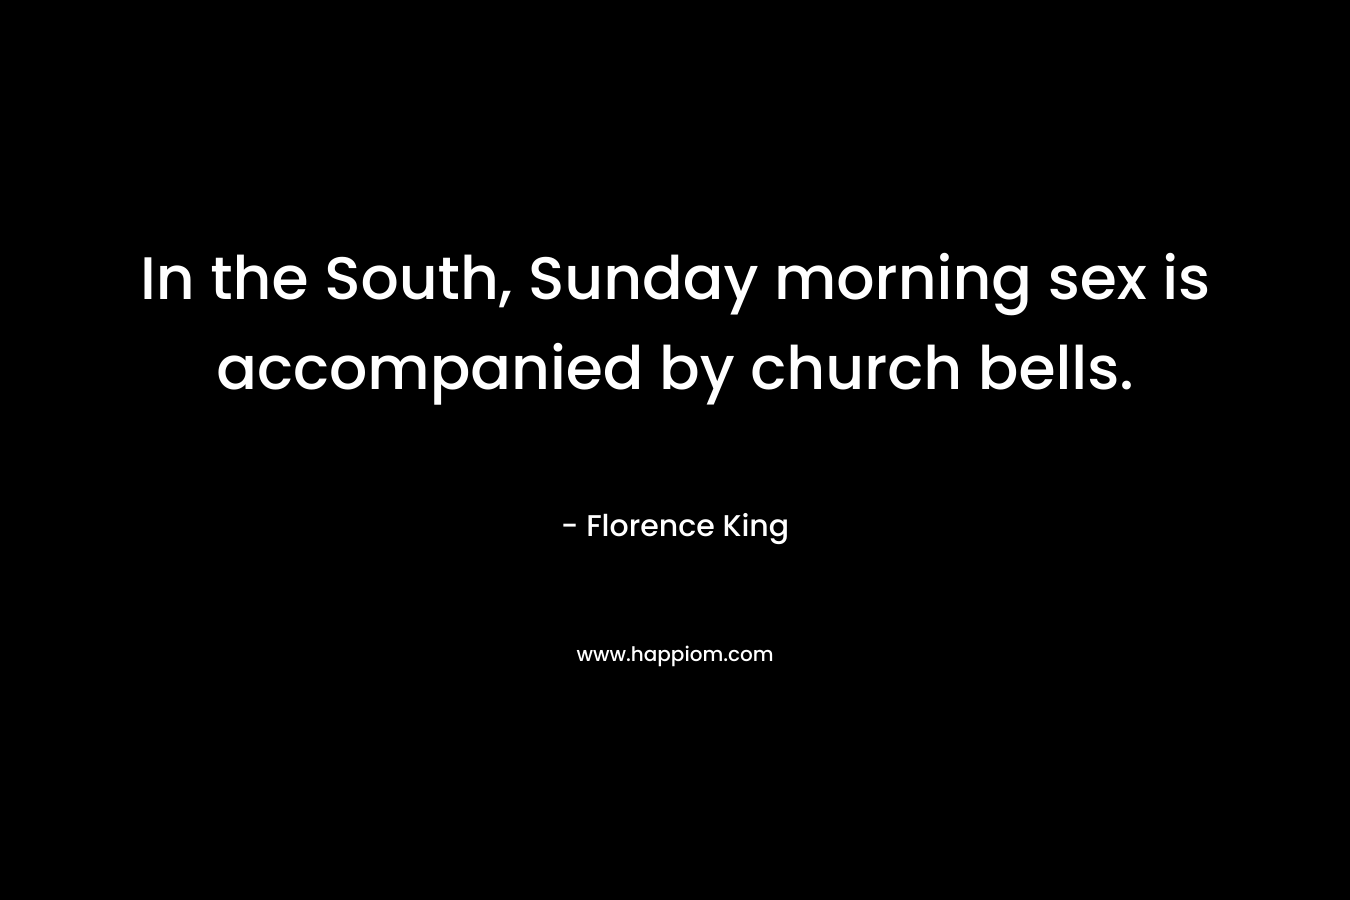 In the South, Sunday morning sex is accompanied by church bells. – Florence King